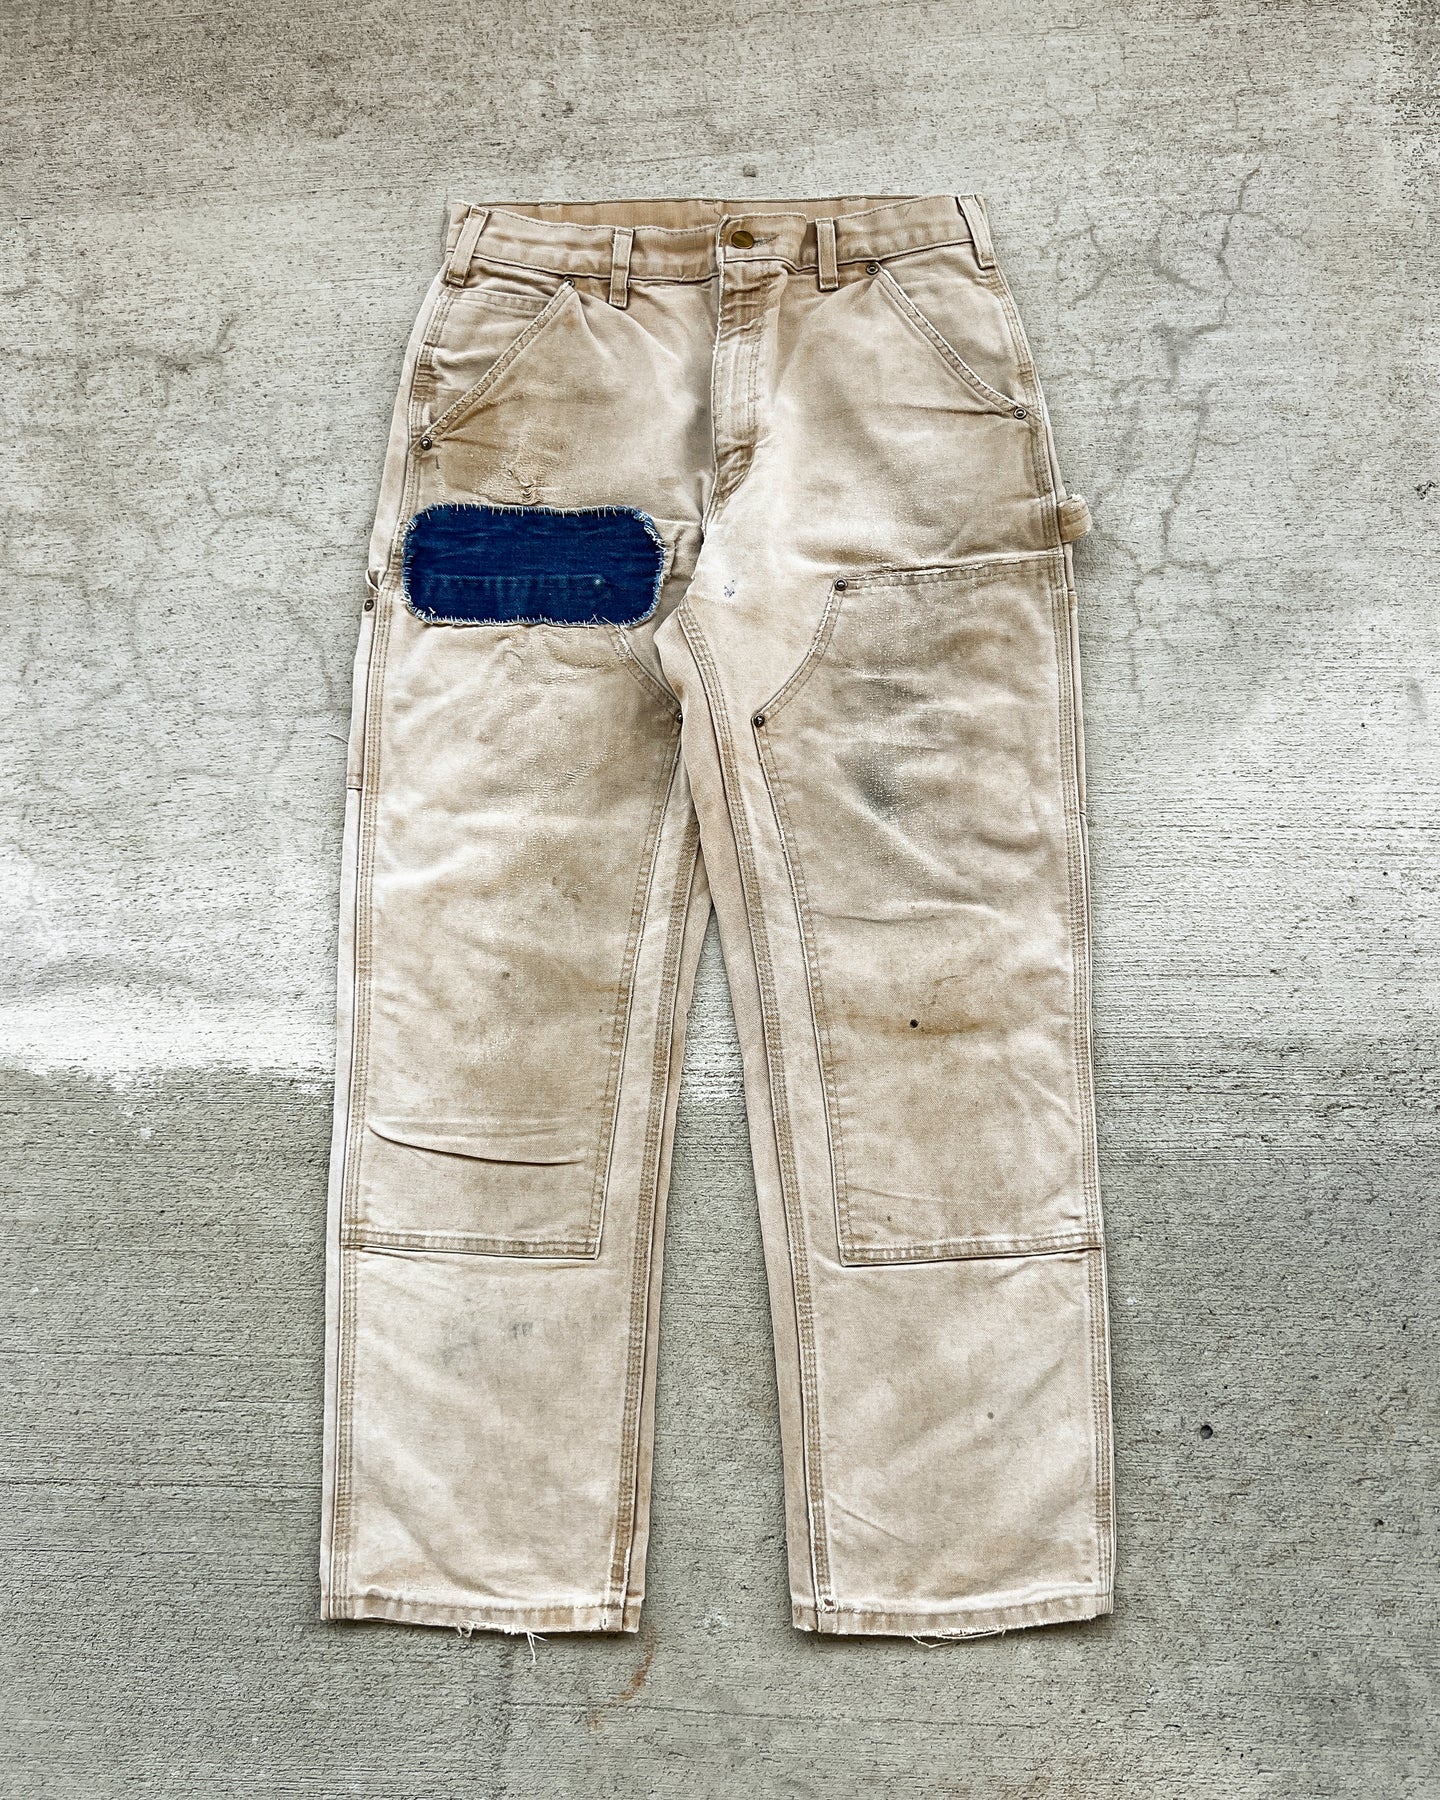 1990s Carhartt Patched Double Knee Carpenter Work Pants - Size 32 x 30